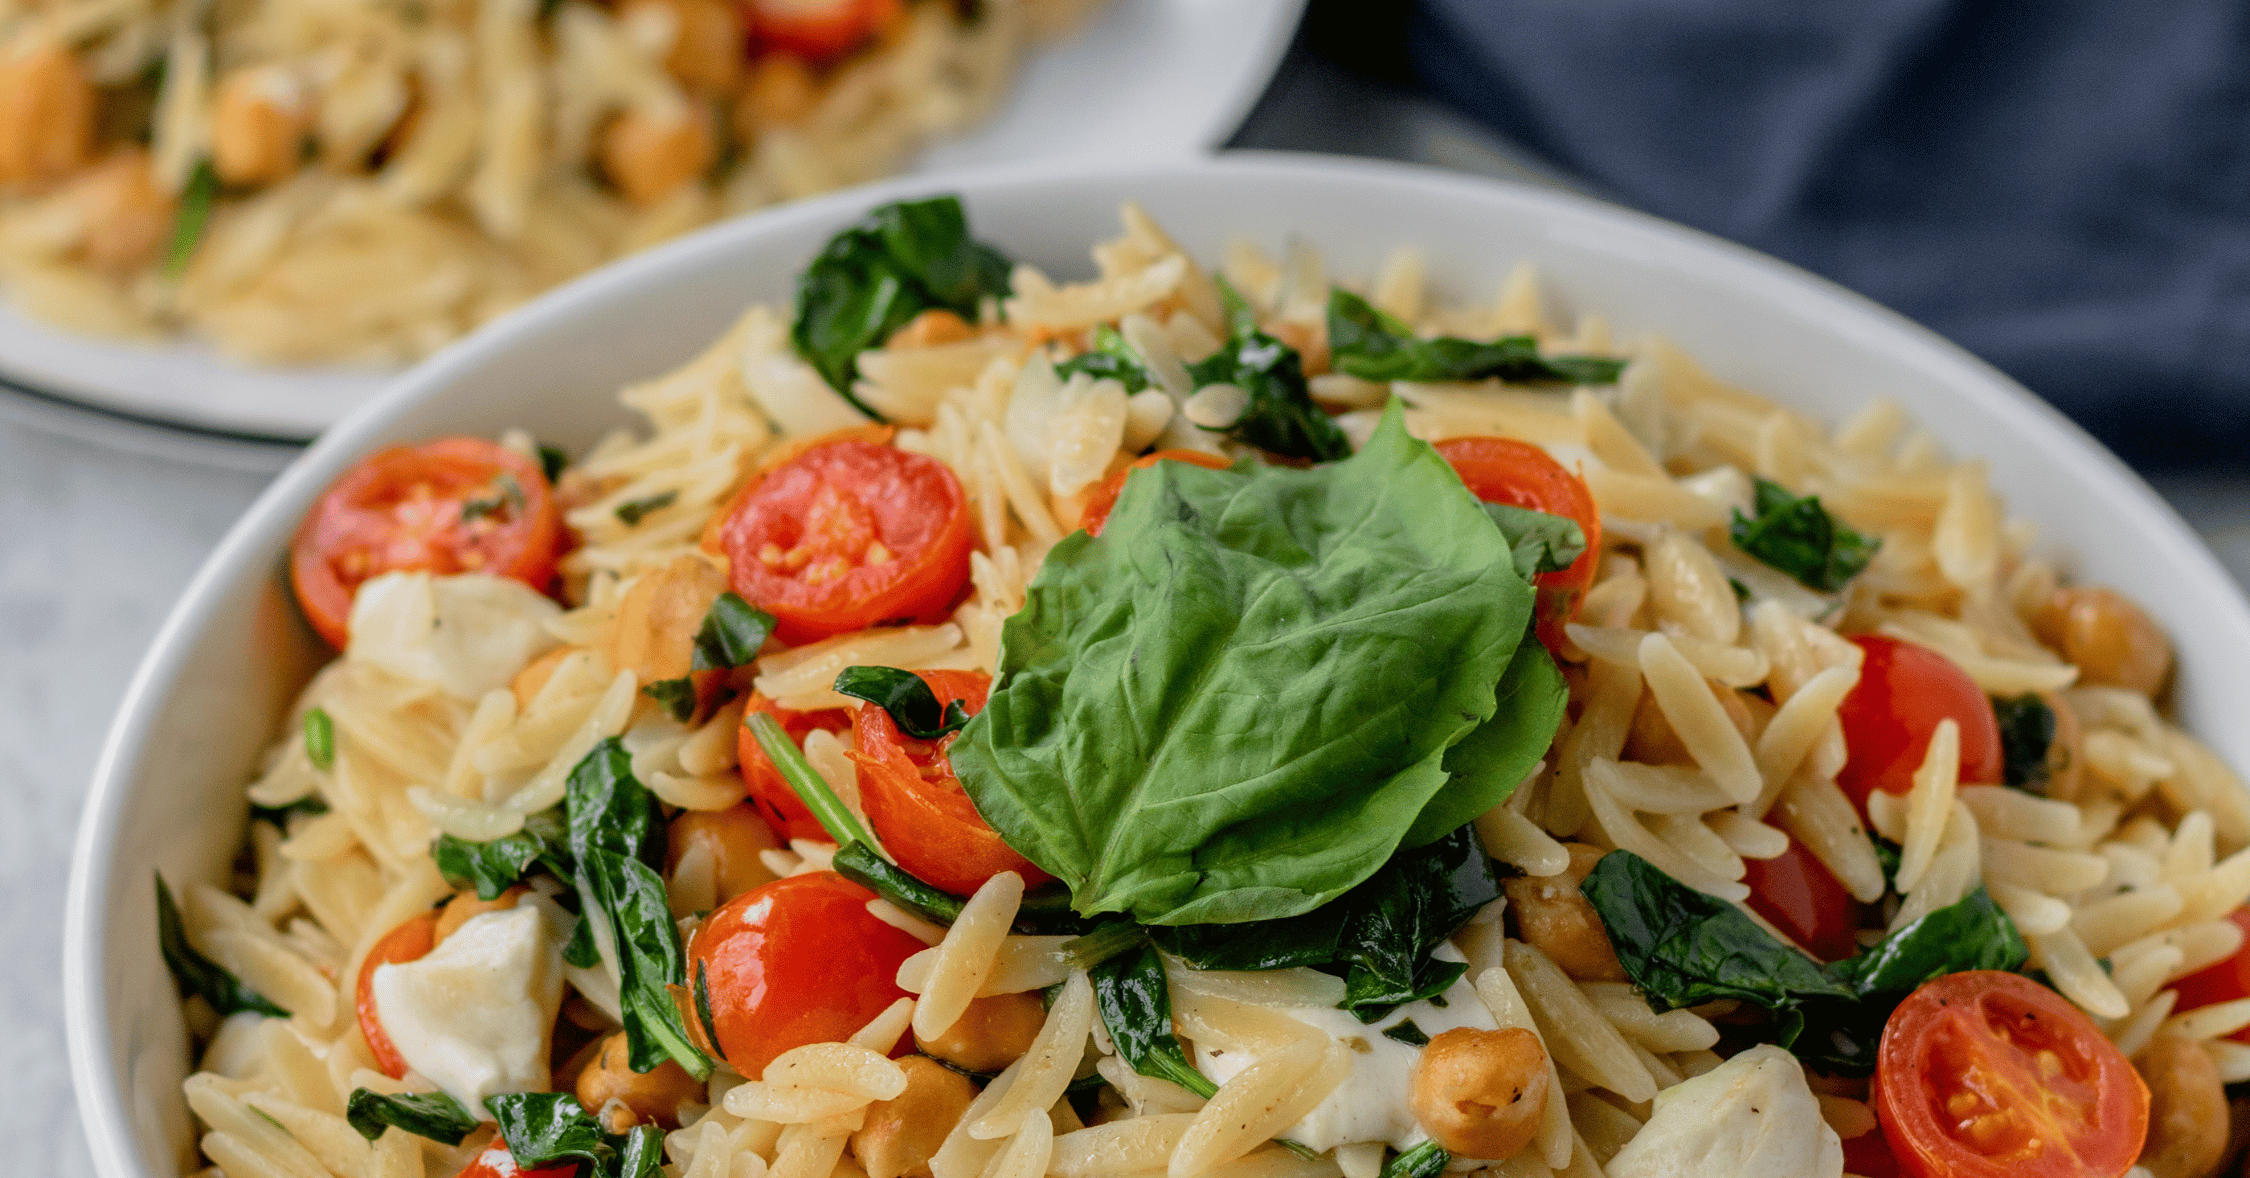 Orzo Pasta Salad with Roasted Chickpeas